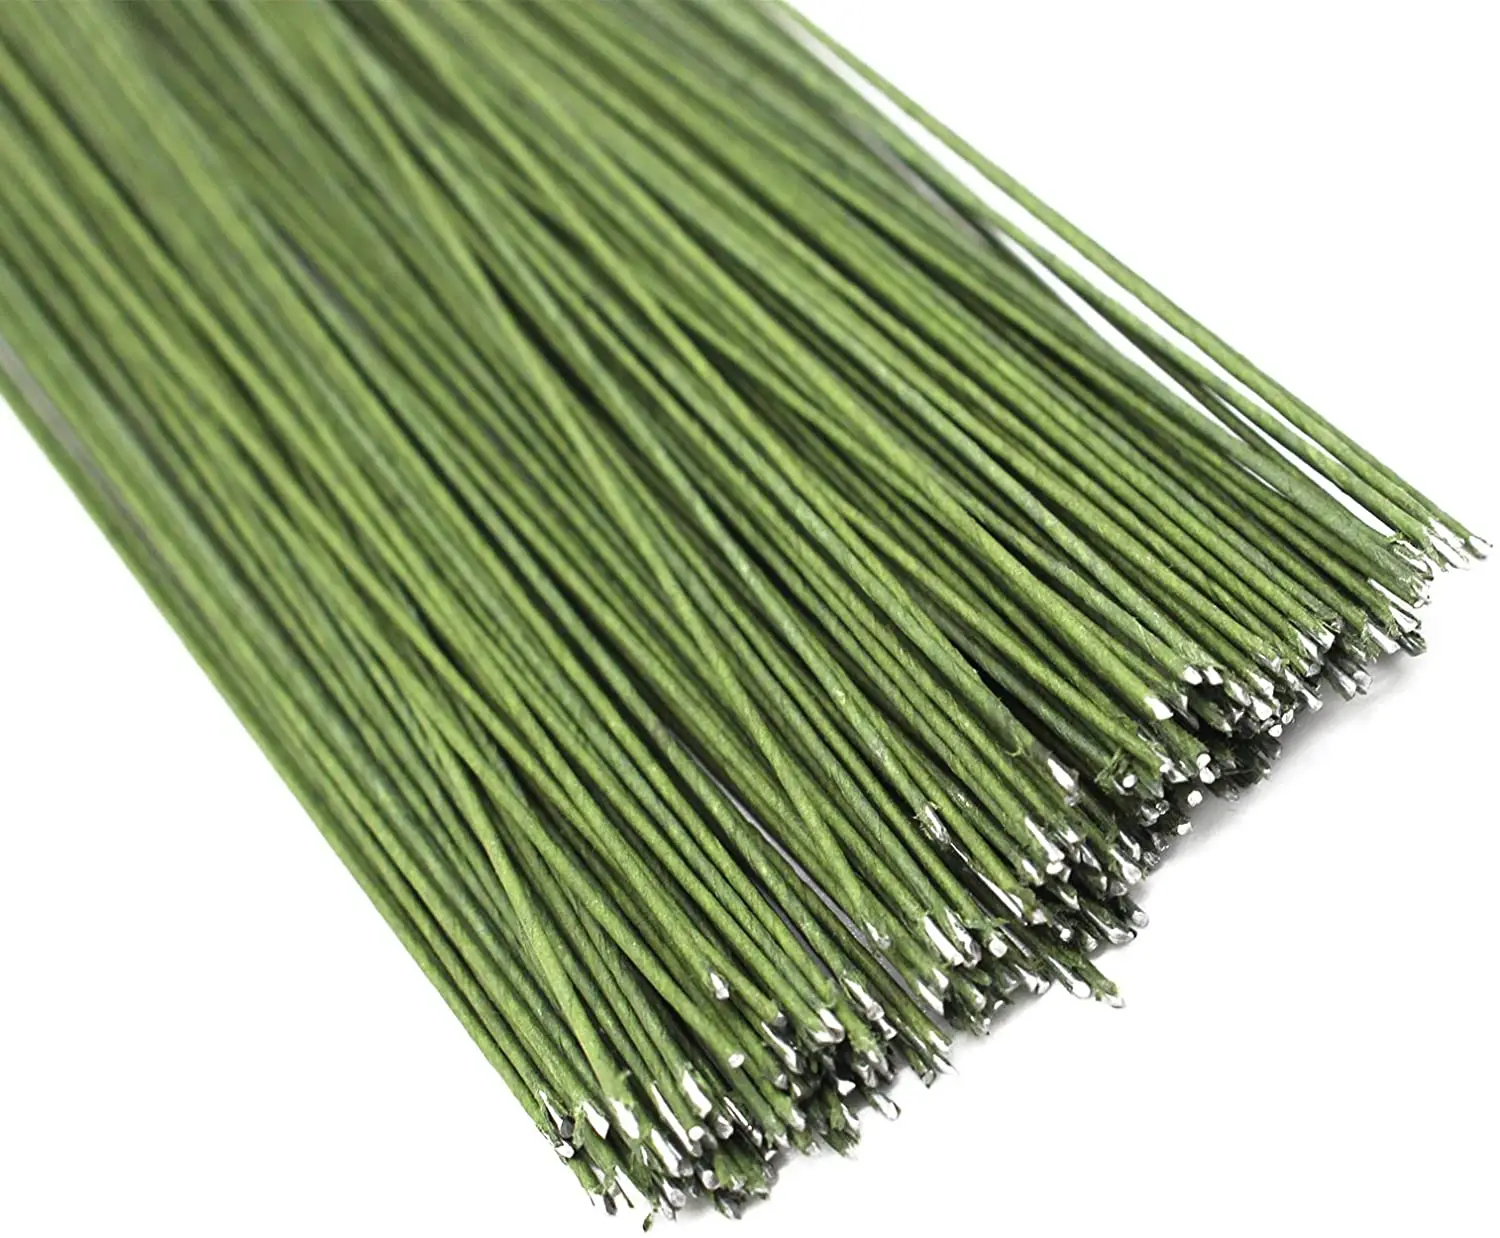 100PCS 18Ga Floral Stem Wires,Green Crafting Floral Stem Wire for DIY  Crafts and Flower Arrangement 14 Inches,Paper Covered